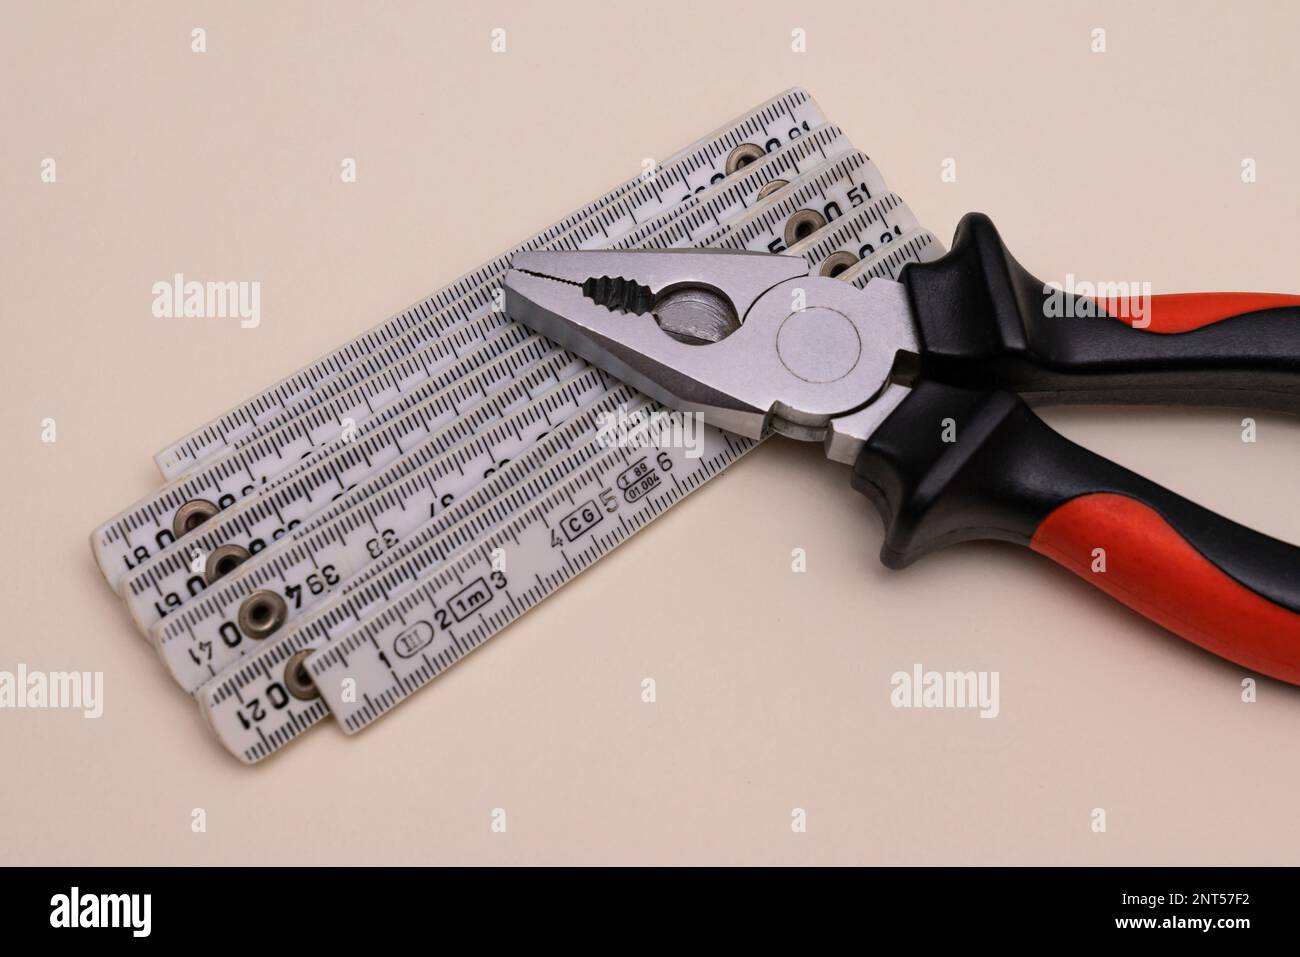 Pliers and a folding ruler lying on a light background. Close up. Stock Photo